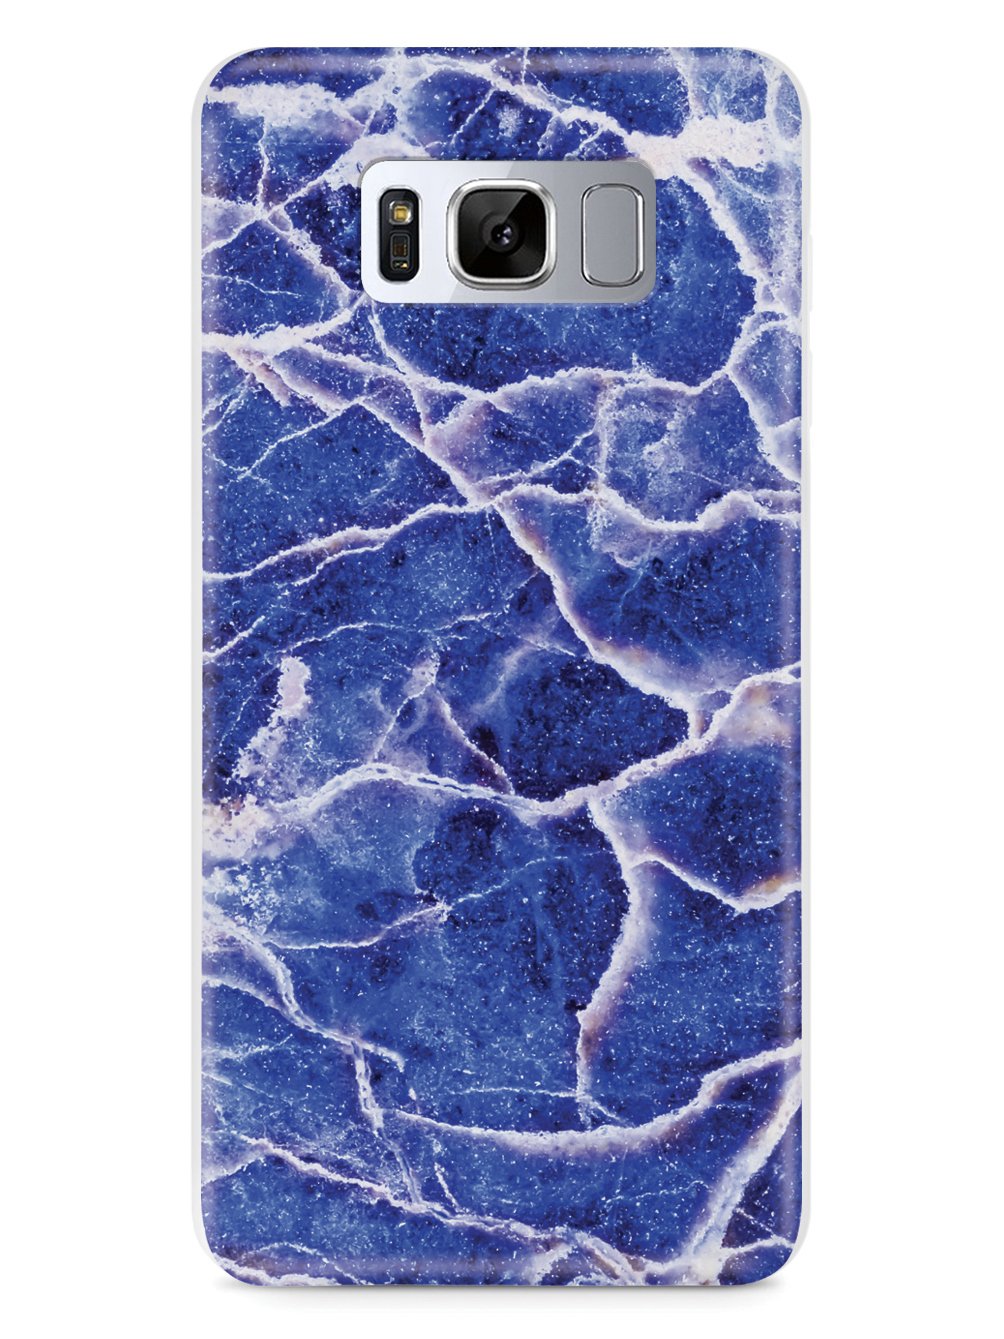 Textured Blue and White Marble Case